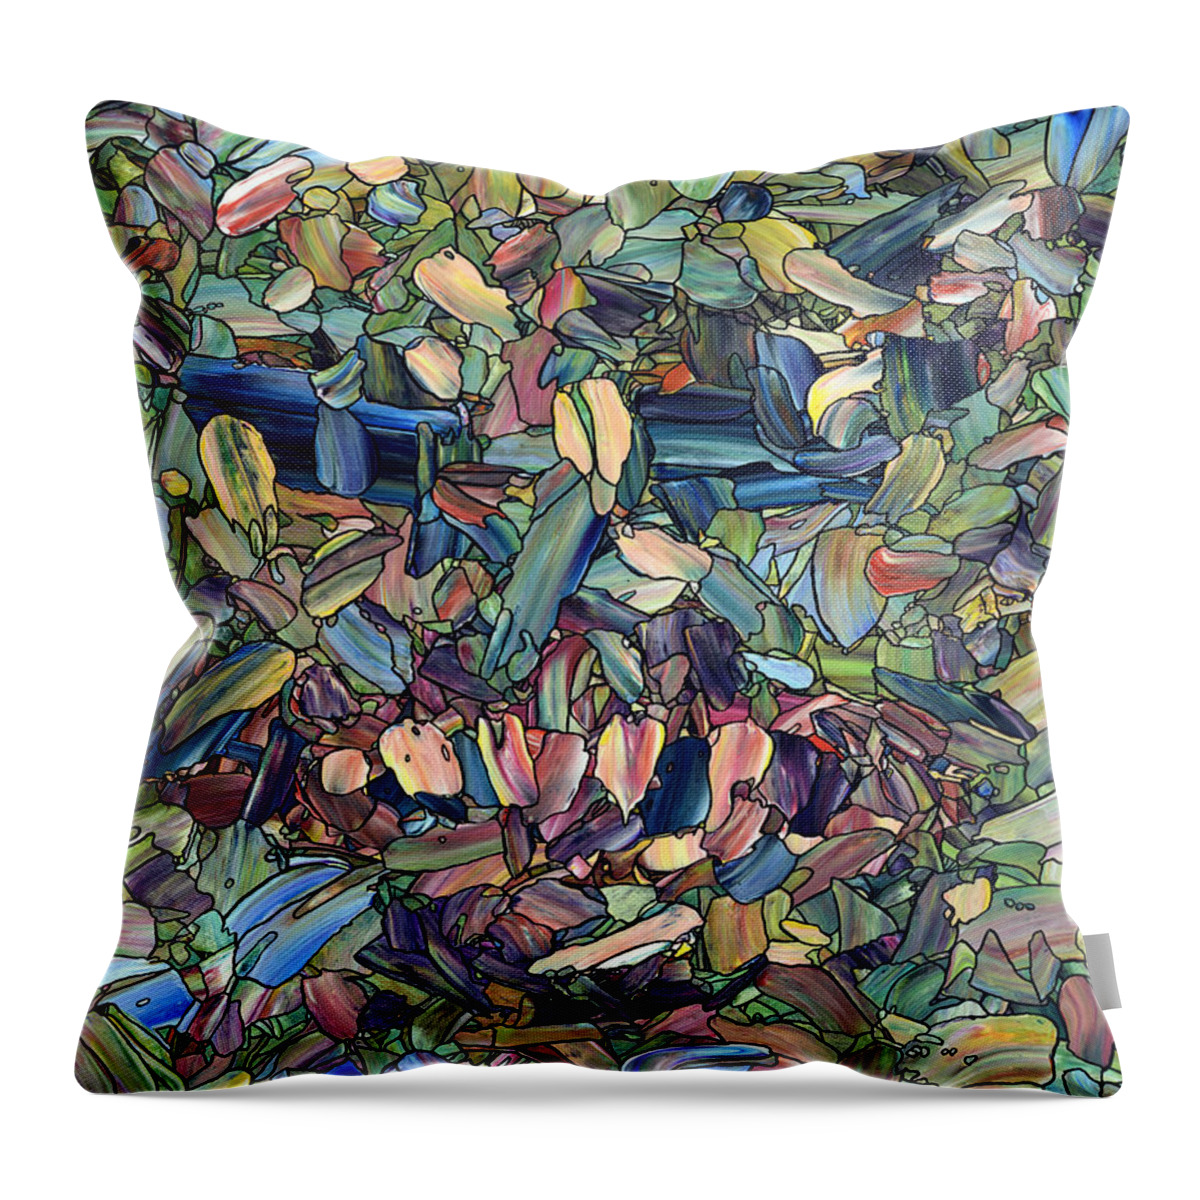 Abstract Throw Pillow featuring the painting Breaking Rank by James W Johnson